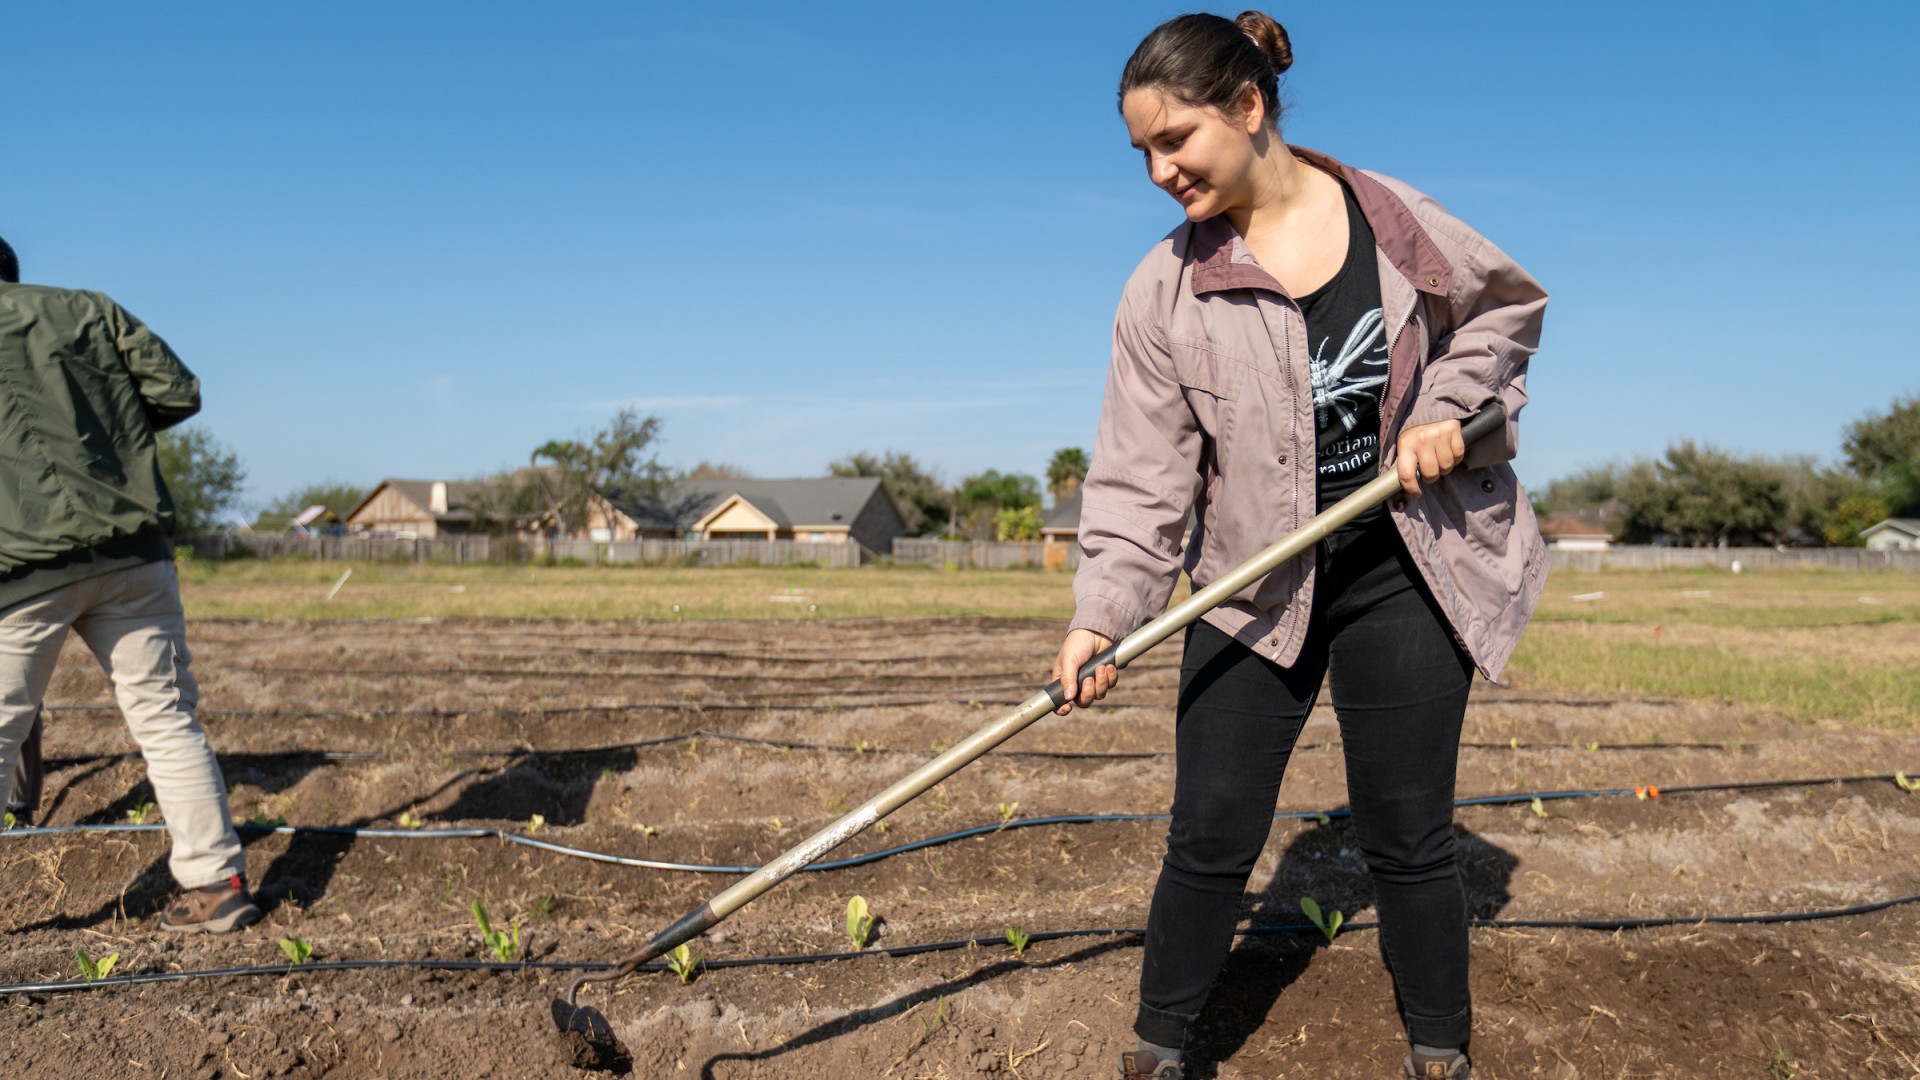 student tending to planted crops breaking soil with hoe